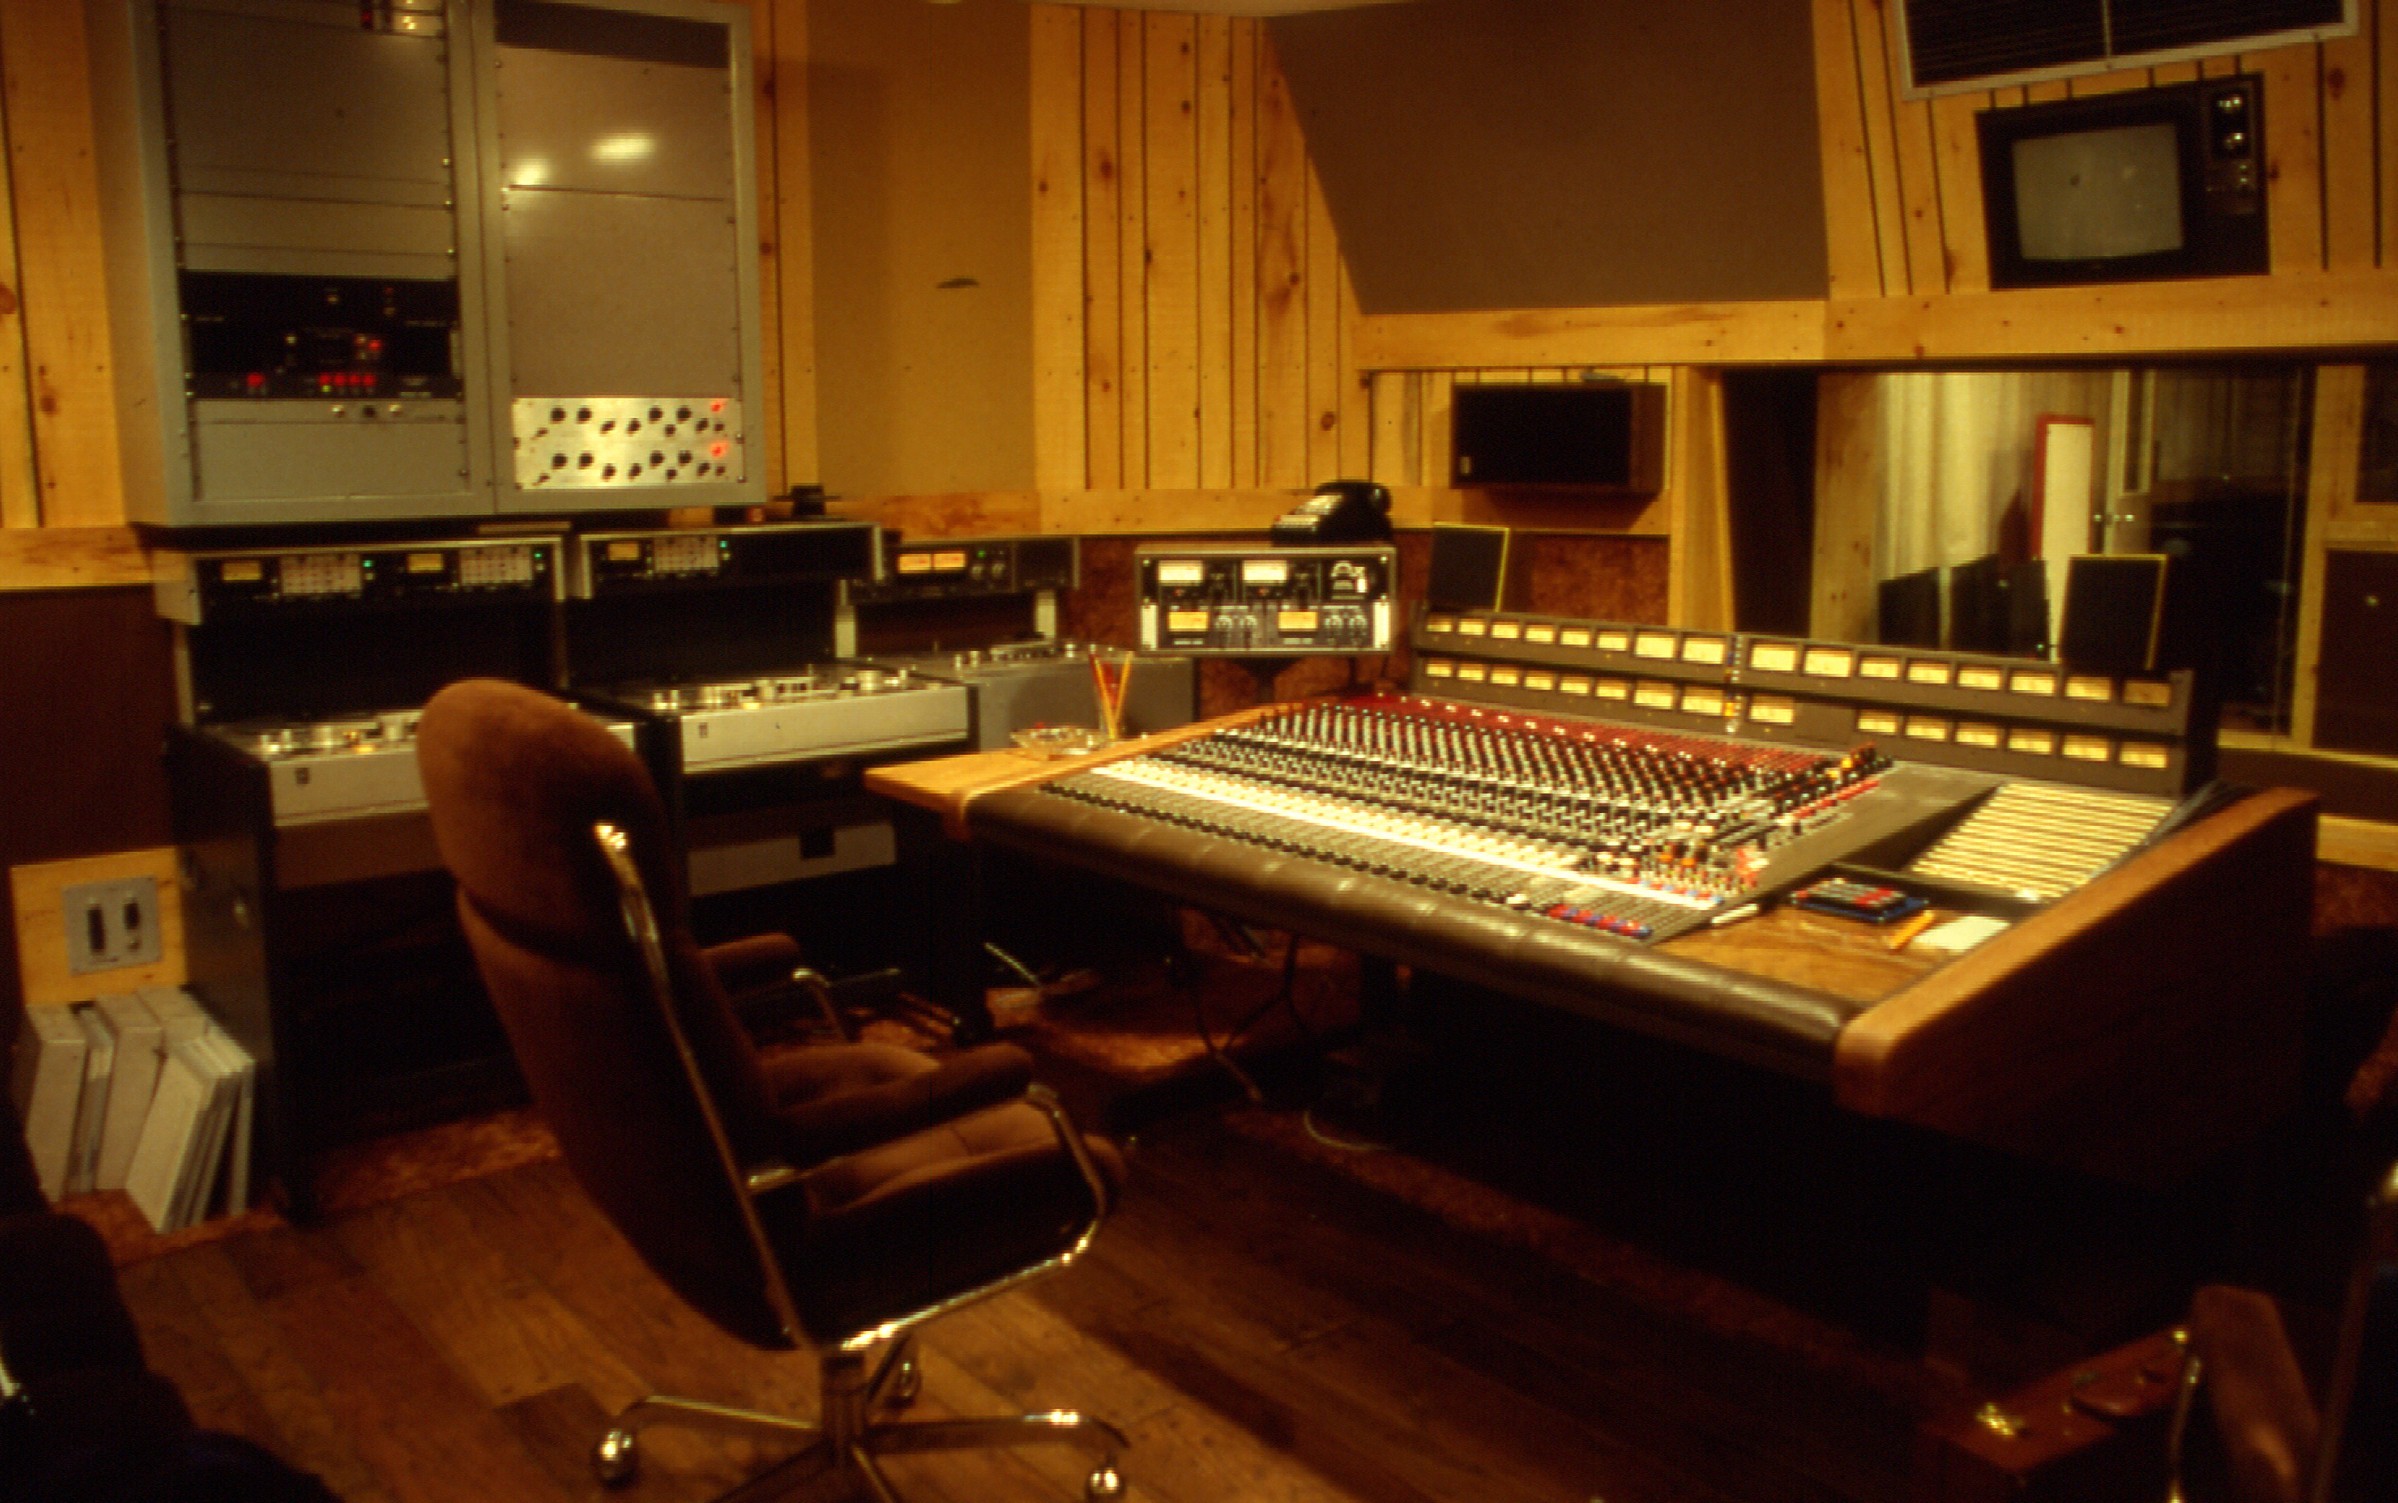 a room with wooden walls, a mixing board, a chair and several computers